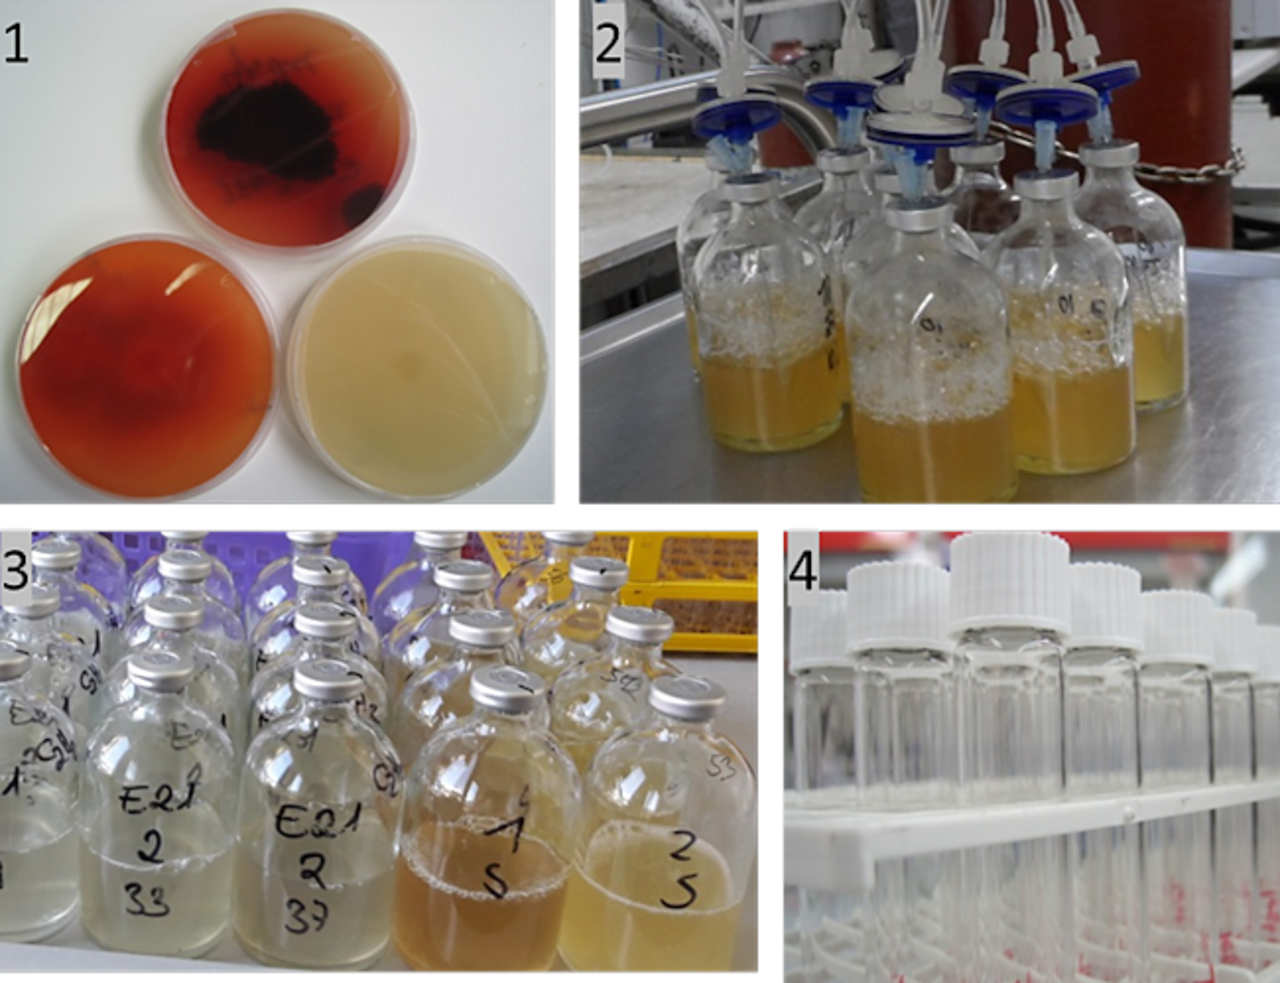 Impressions from the laboratory work: 1. Agar overgrown with pure fungal culture, 2. Experimental vessels with fungal hyphae in liquid medium are purged O2-free, 3. Experimental vessels with differing in medium types for incubation of fungi, 4. Gas sample